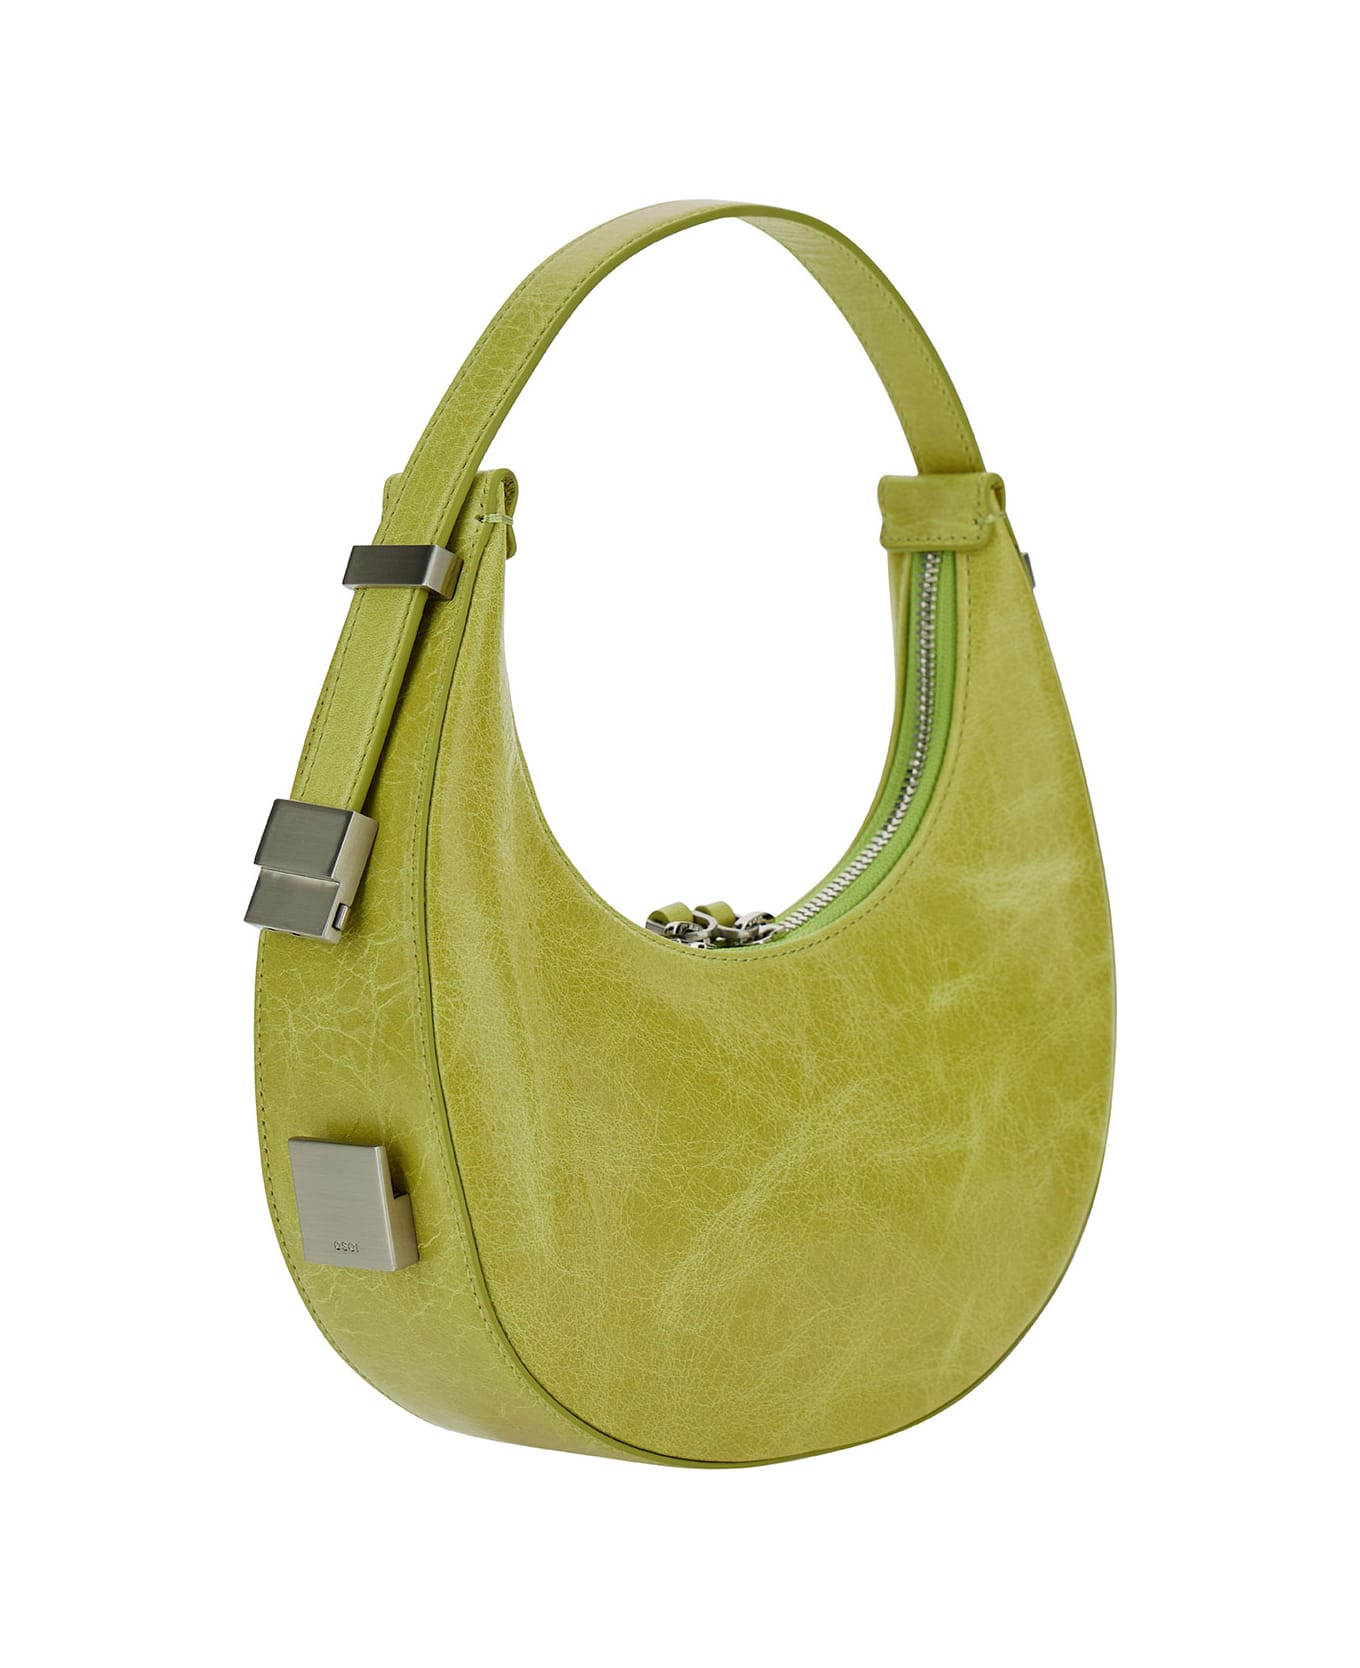 OSOI 'toni Mini' Yellow Shoulder Bag With Engraved Logo In Leather Woman - Yellow トートバッグ